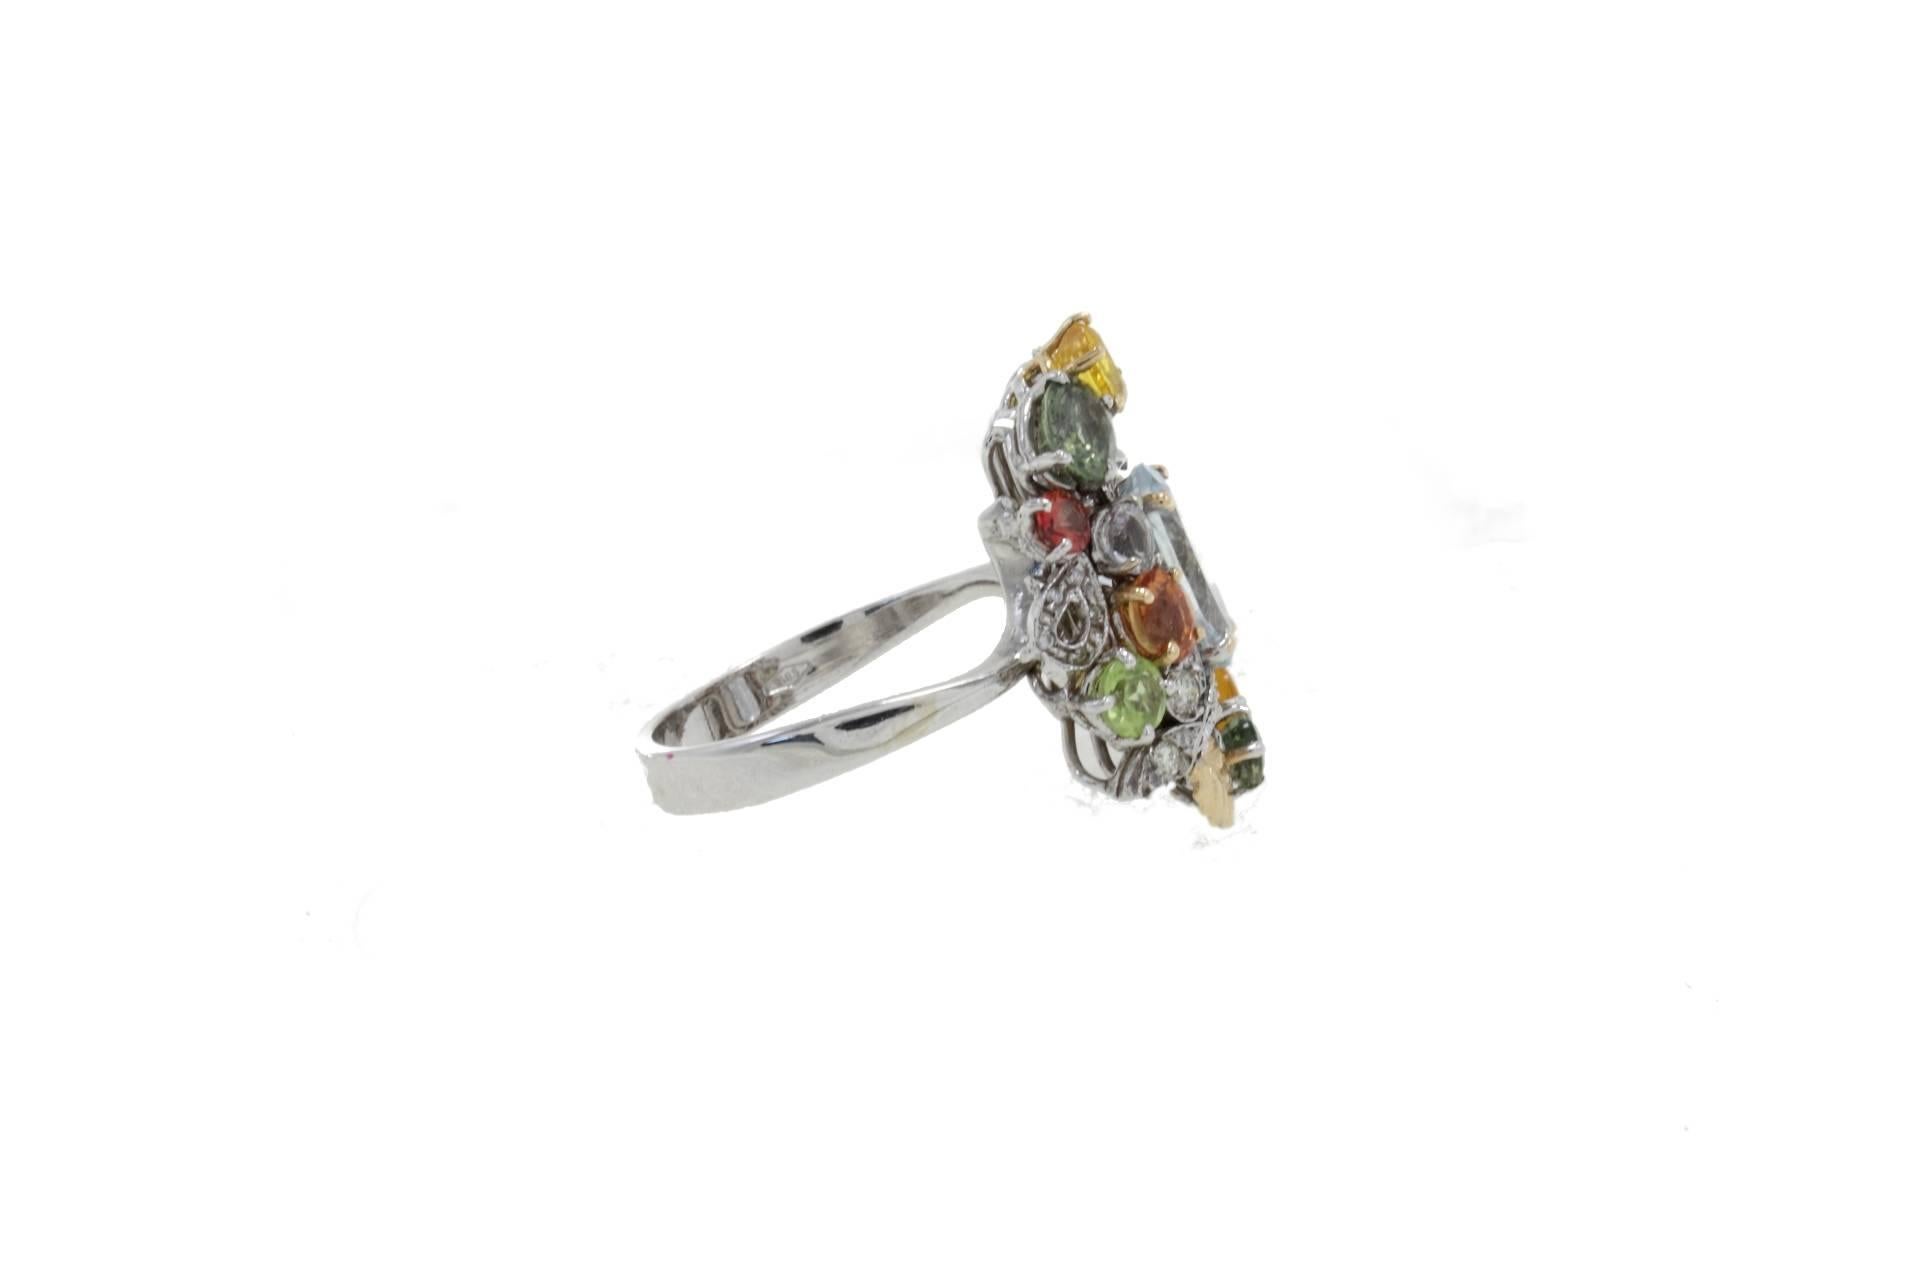 Cocktail ring in 14k white gold mounted with a central aquamarine surrounde by diamonds, peridots, multicolor sapphires and  topaz.

Diamonds 0.26 kt
Peridots, Multicolor Sapphires, Topaz, Aquamarine 5.76 kt
Tot.Weight 7.70 gr
R.F gerc